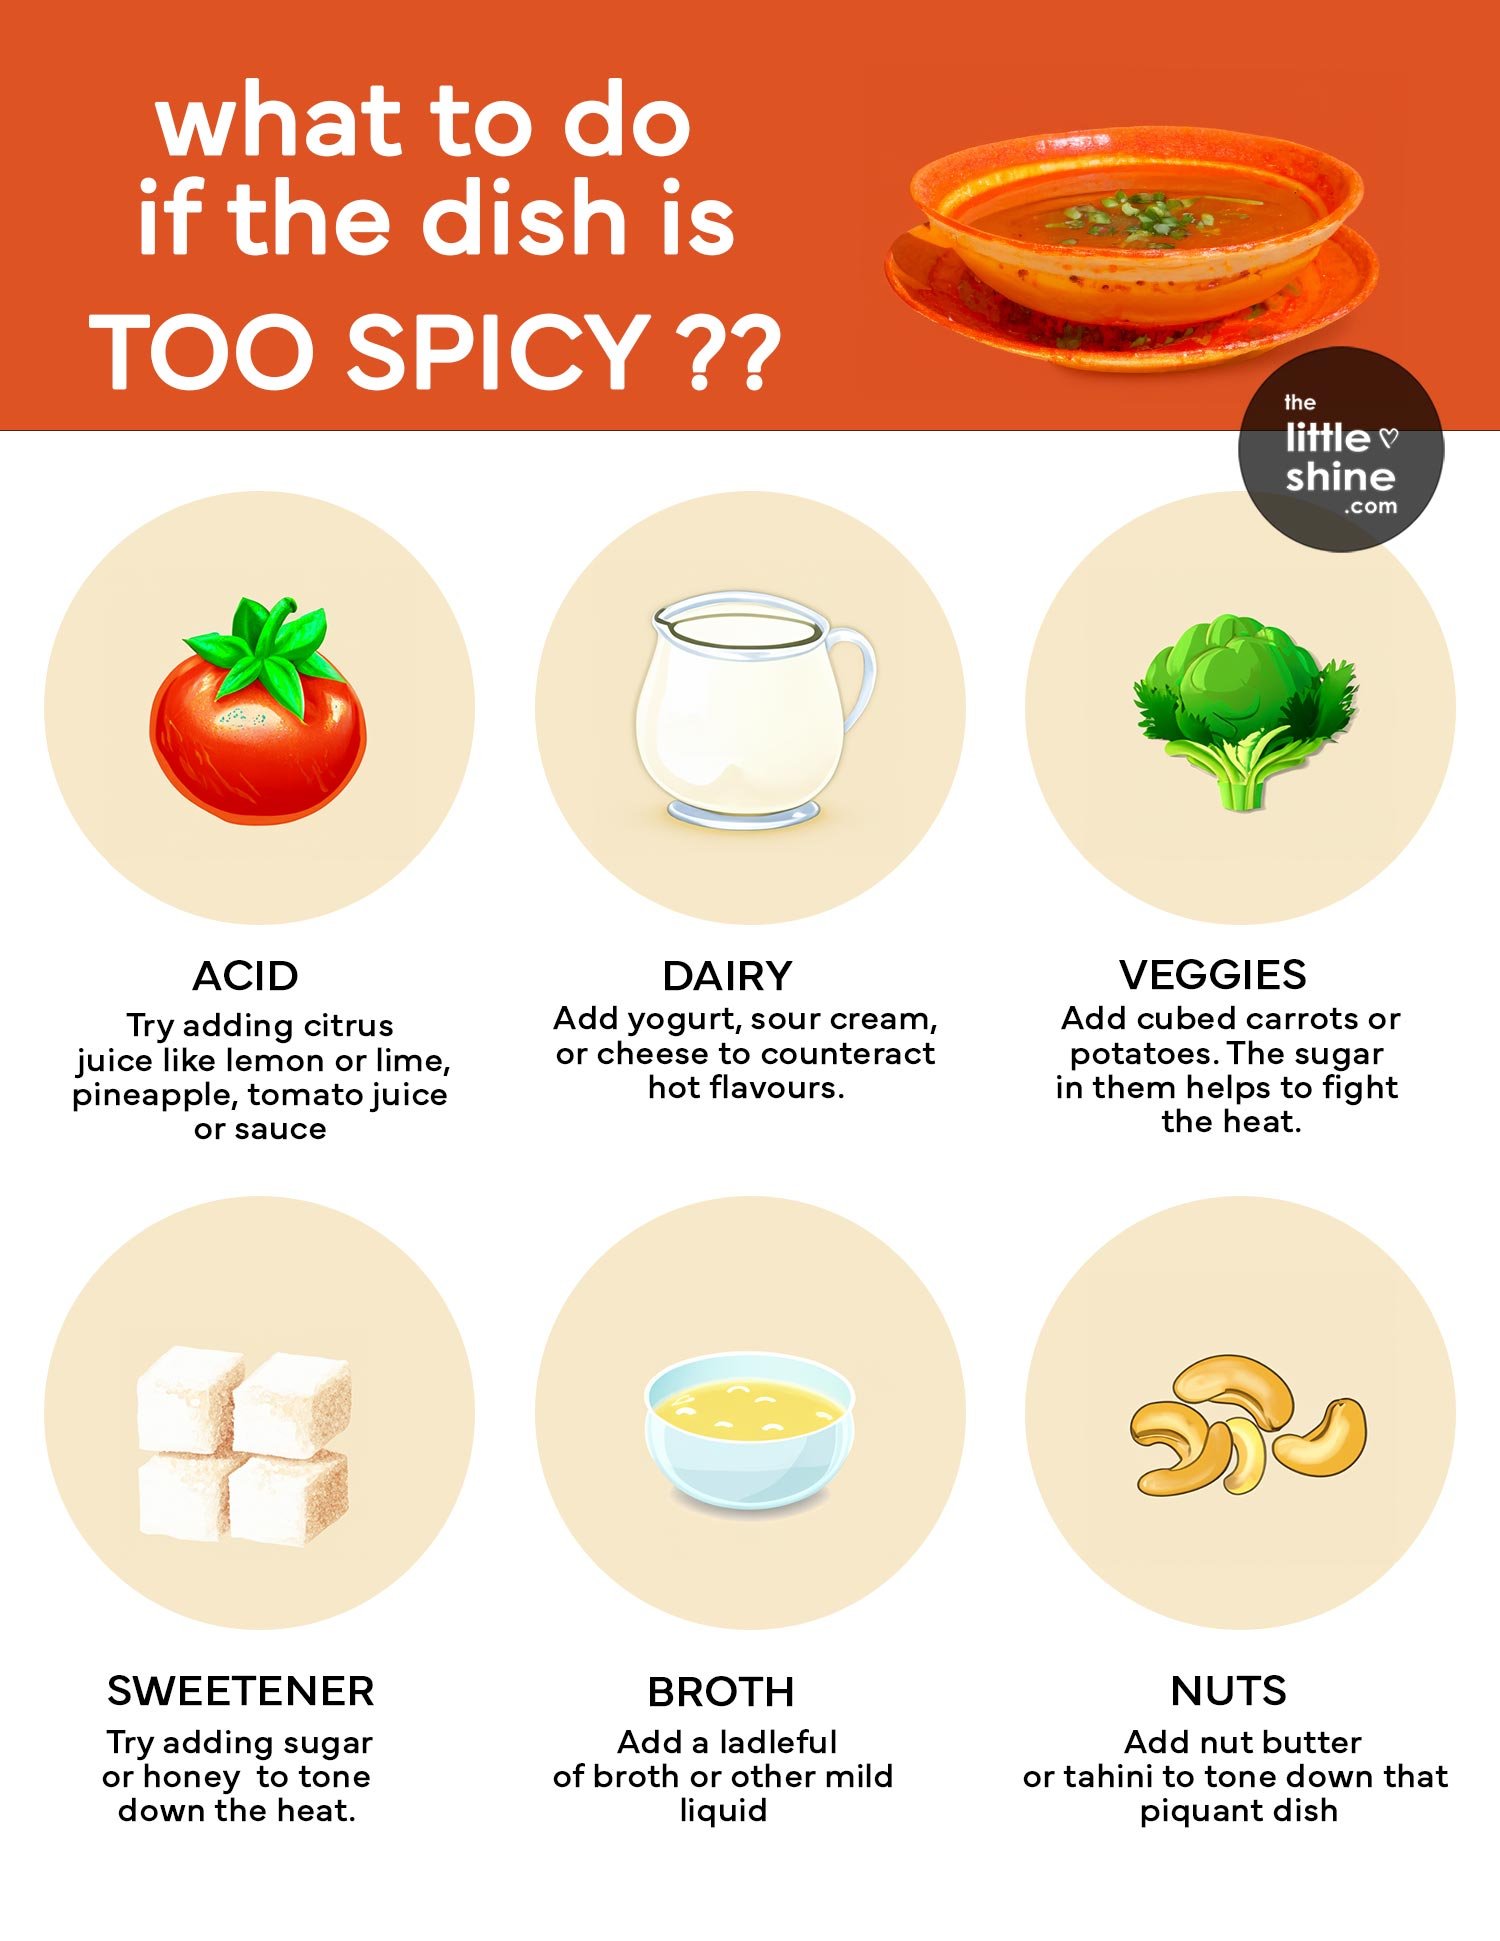 What Do You Do If Your Food Is Too Spicy?